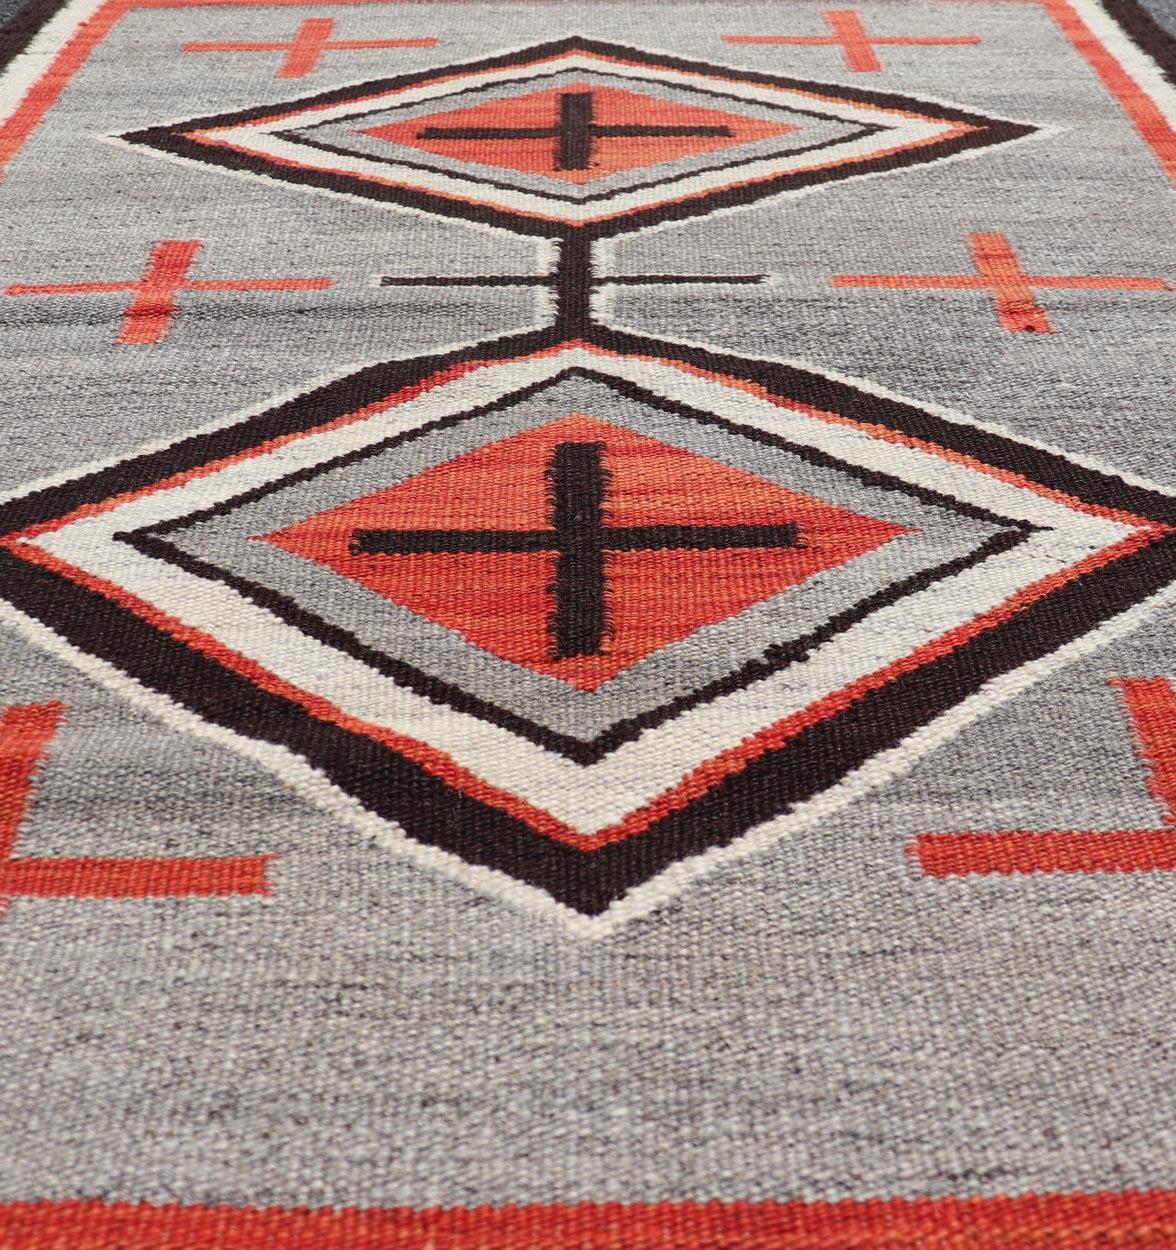 Navajo Modern Rug with Geometric Tribal Design in Gray, Red, Charcoal And Ivory. Keivan Woven Arts / rug RSC-86503-AR-163, country of origin India, type: North America / Navajo, circa early 21st century. 
Measures: 3'1 x 4'11 
This intriguing